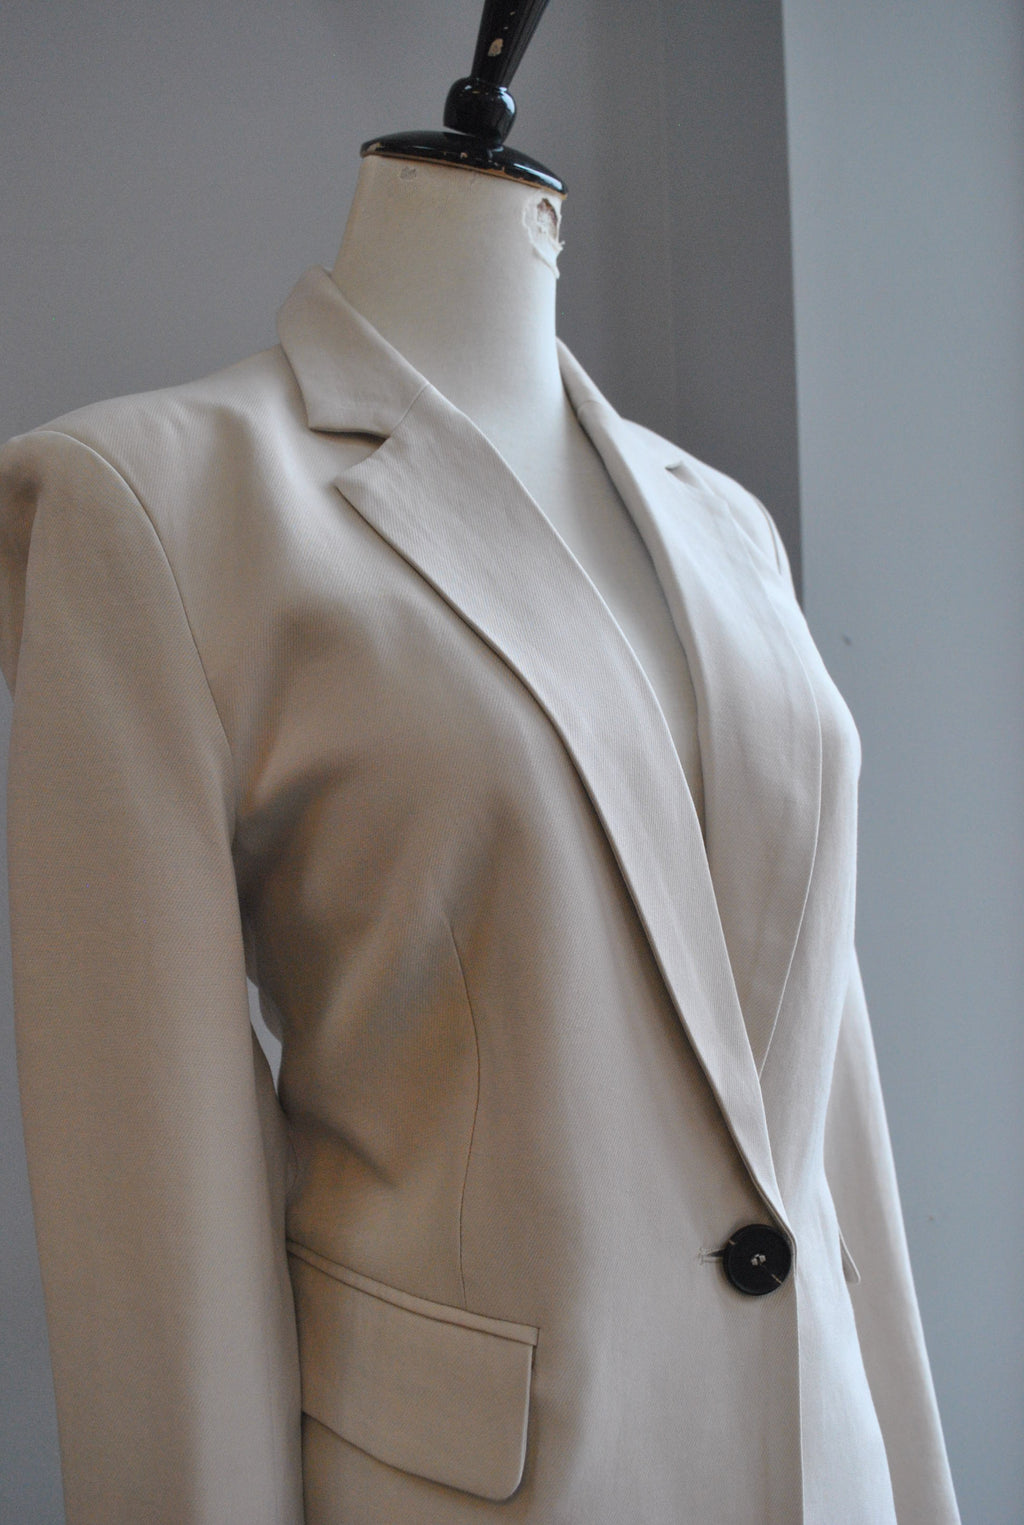 CLEARANCE - OATMEAL LINEN LOOK SUIT